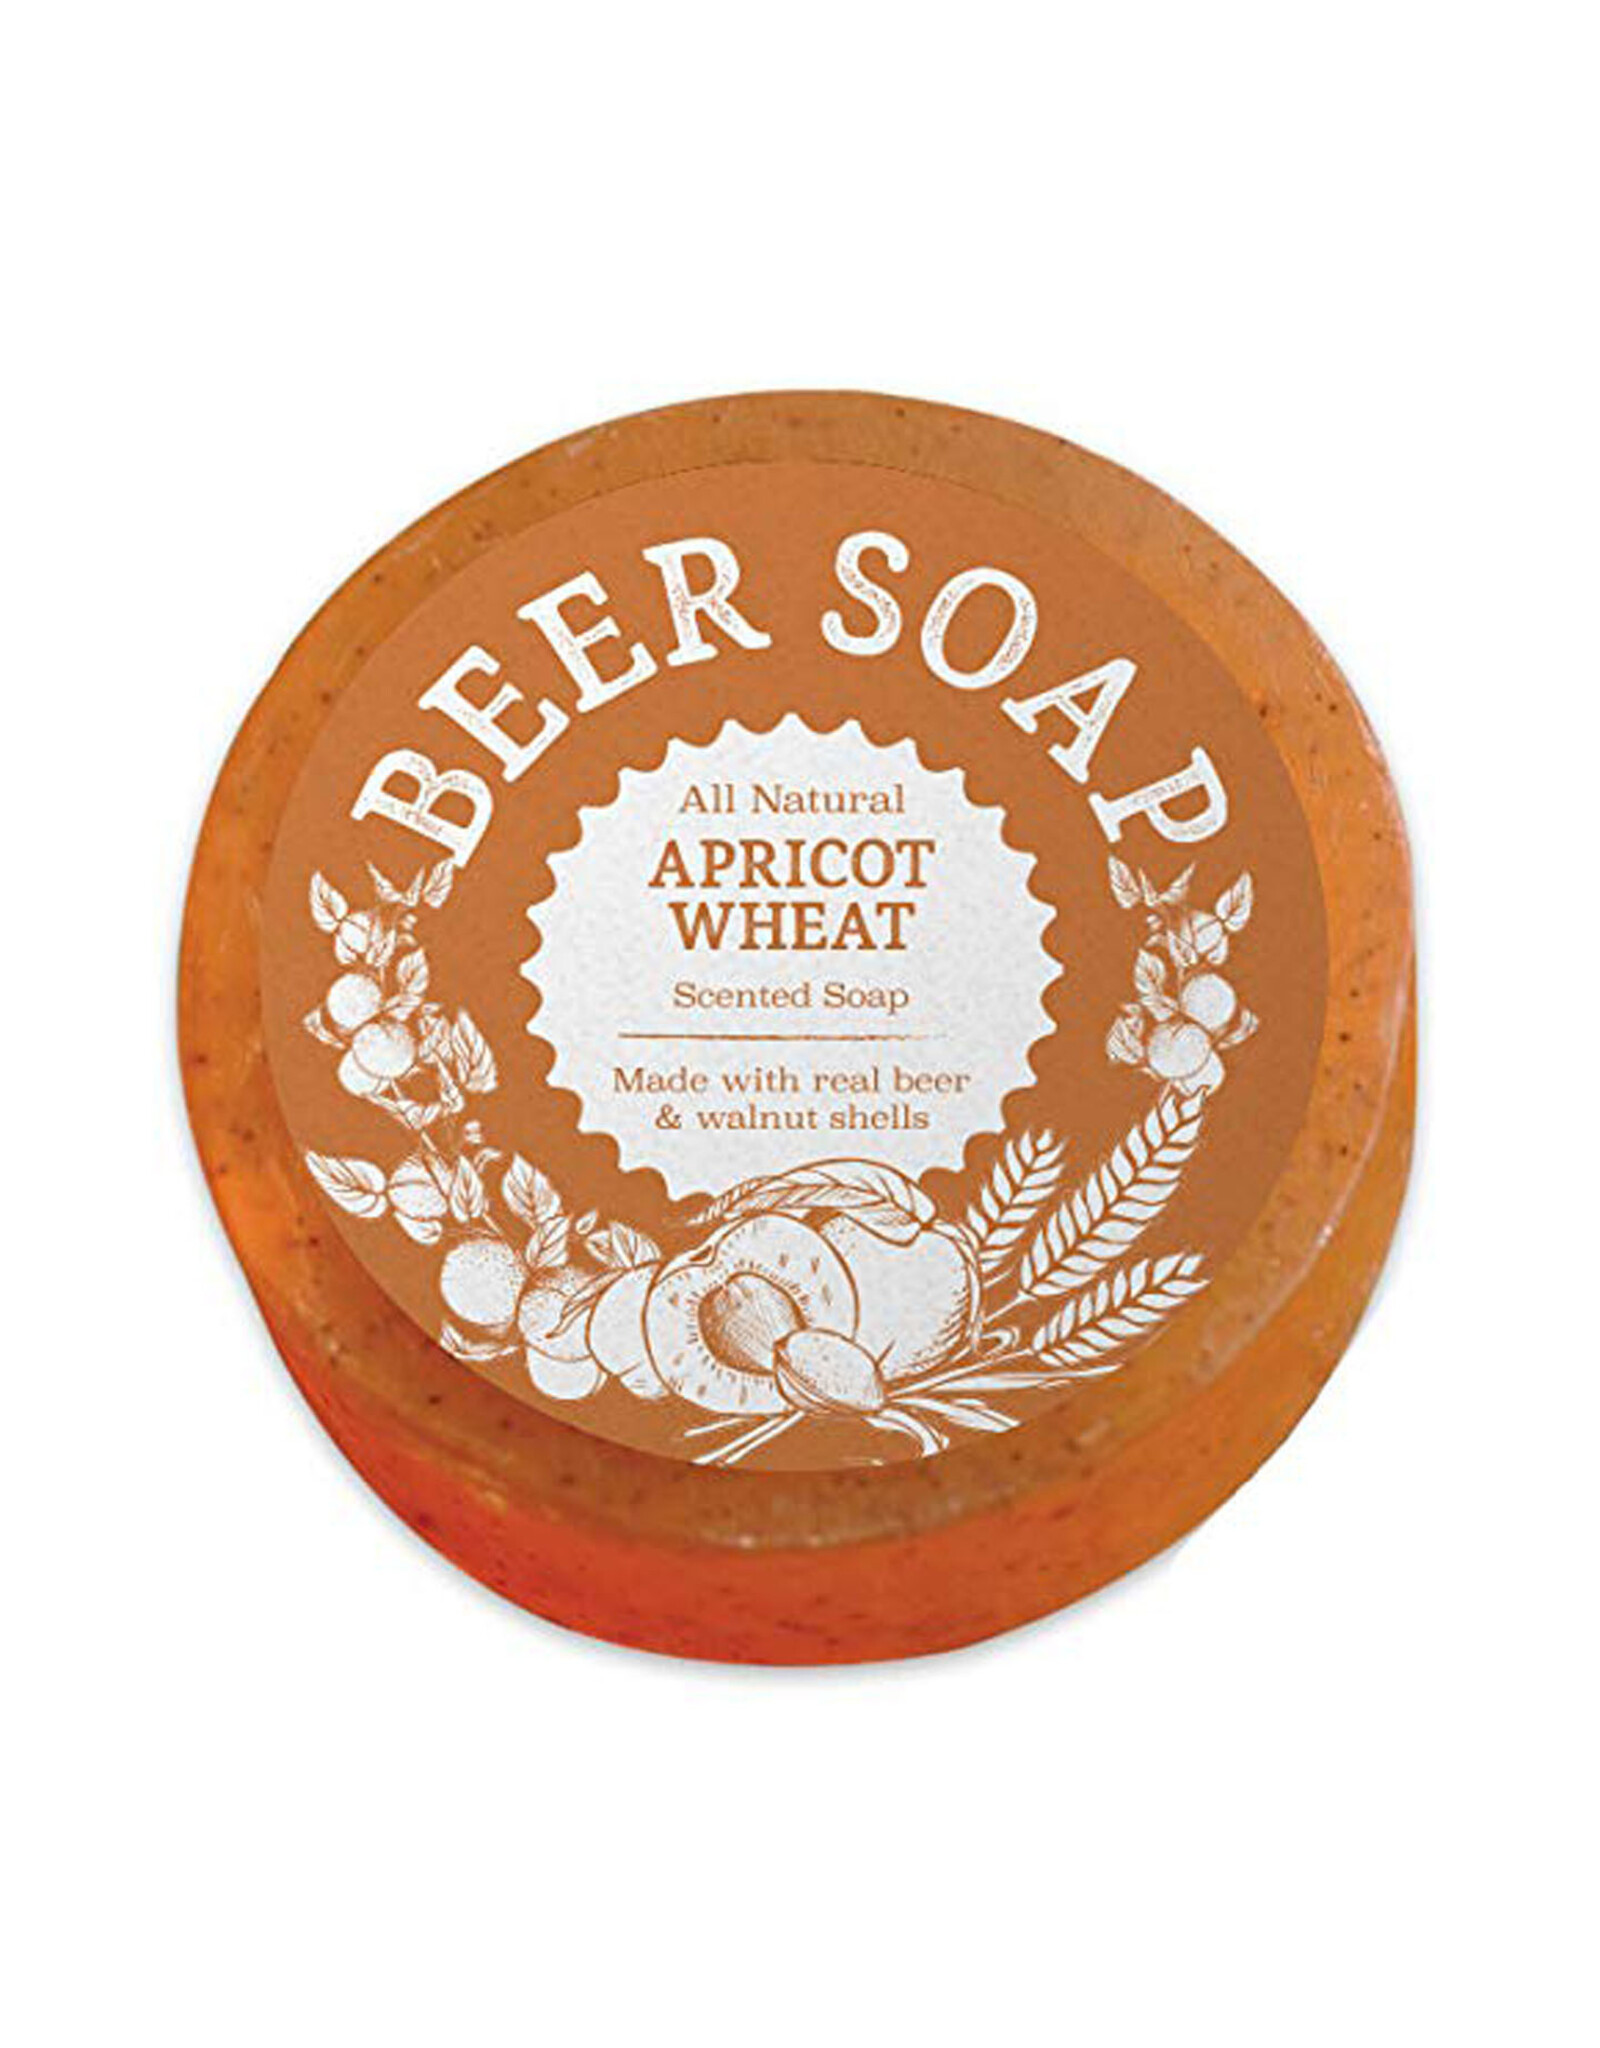 Apricot Wheat Beer Soap